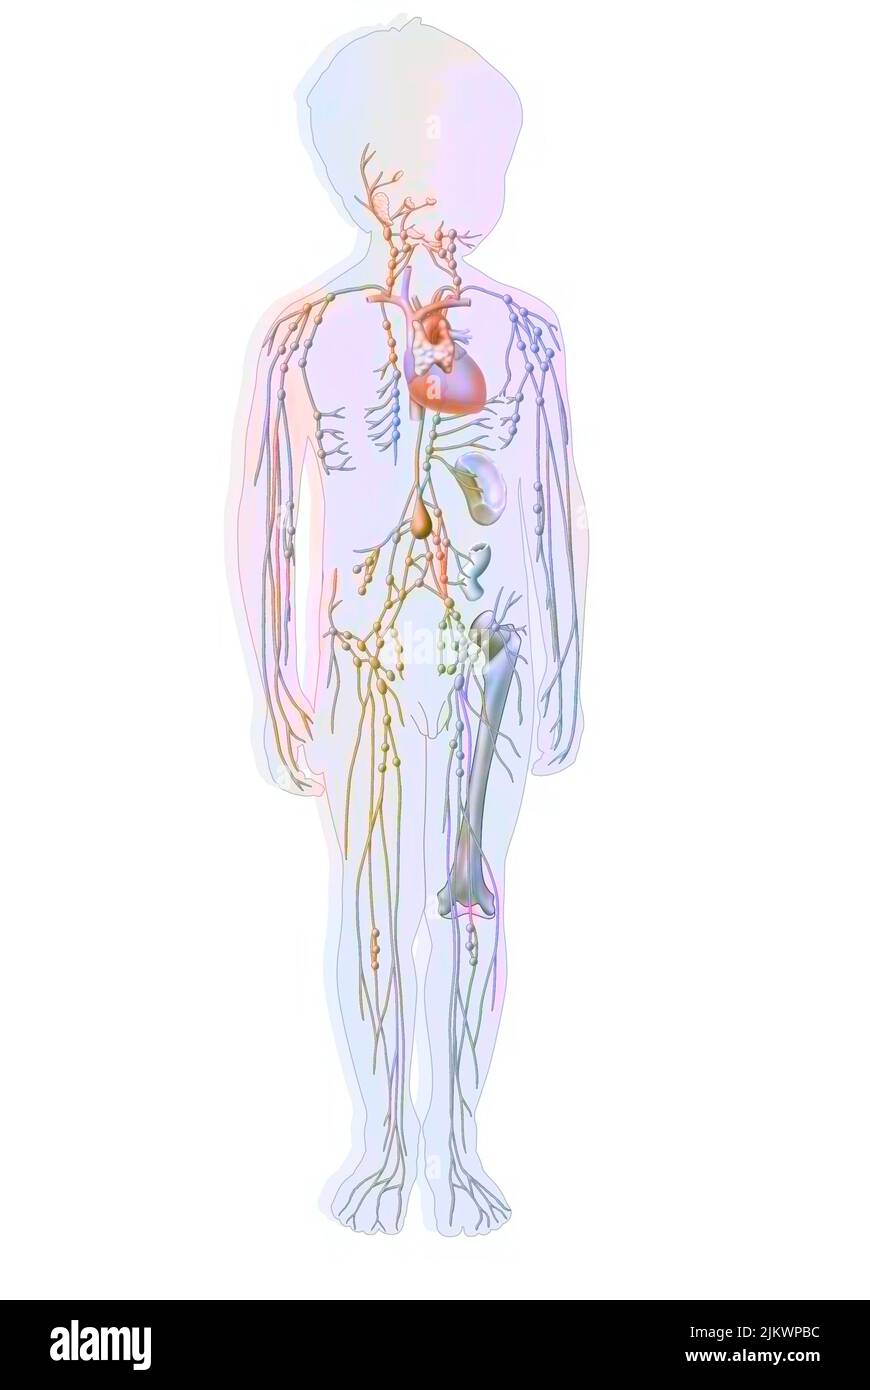 Lymphatic system in children with lymph vessels and nodes. Stock Photo